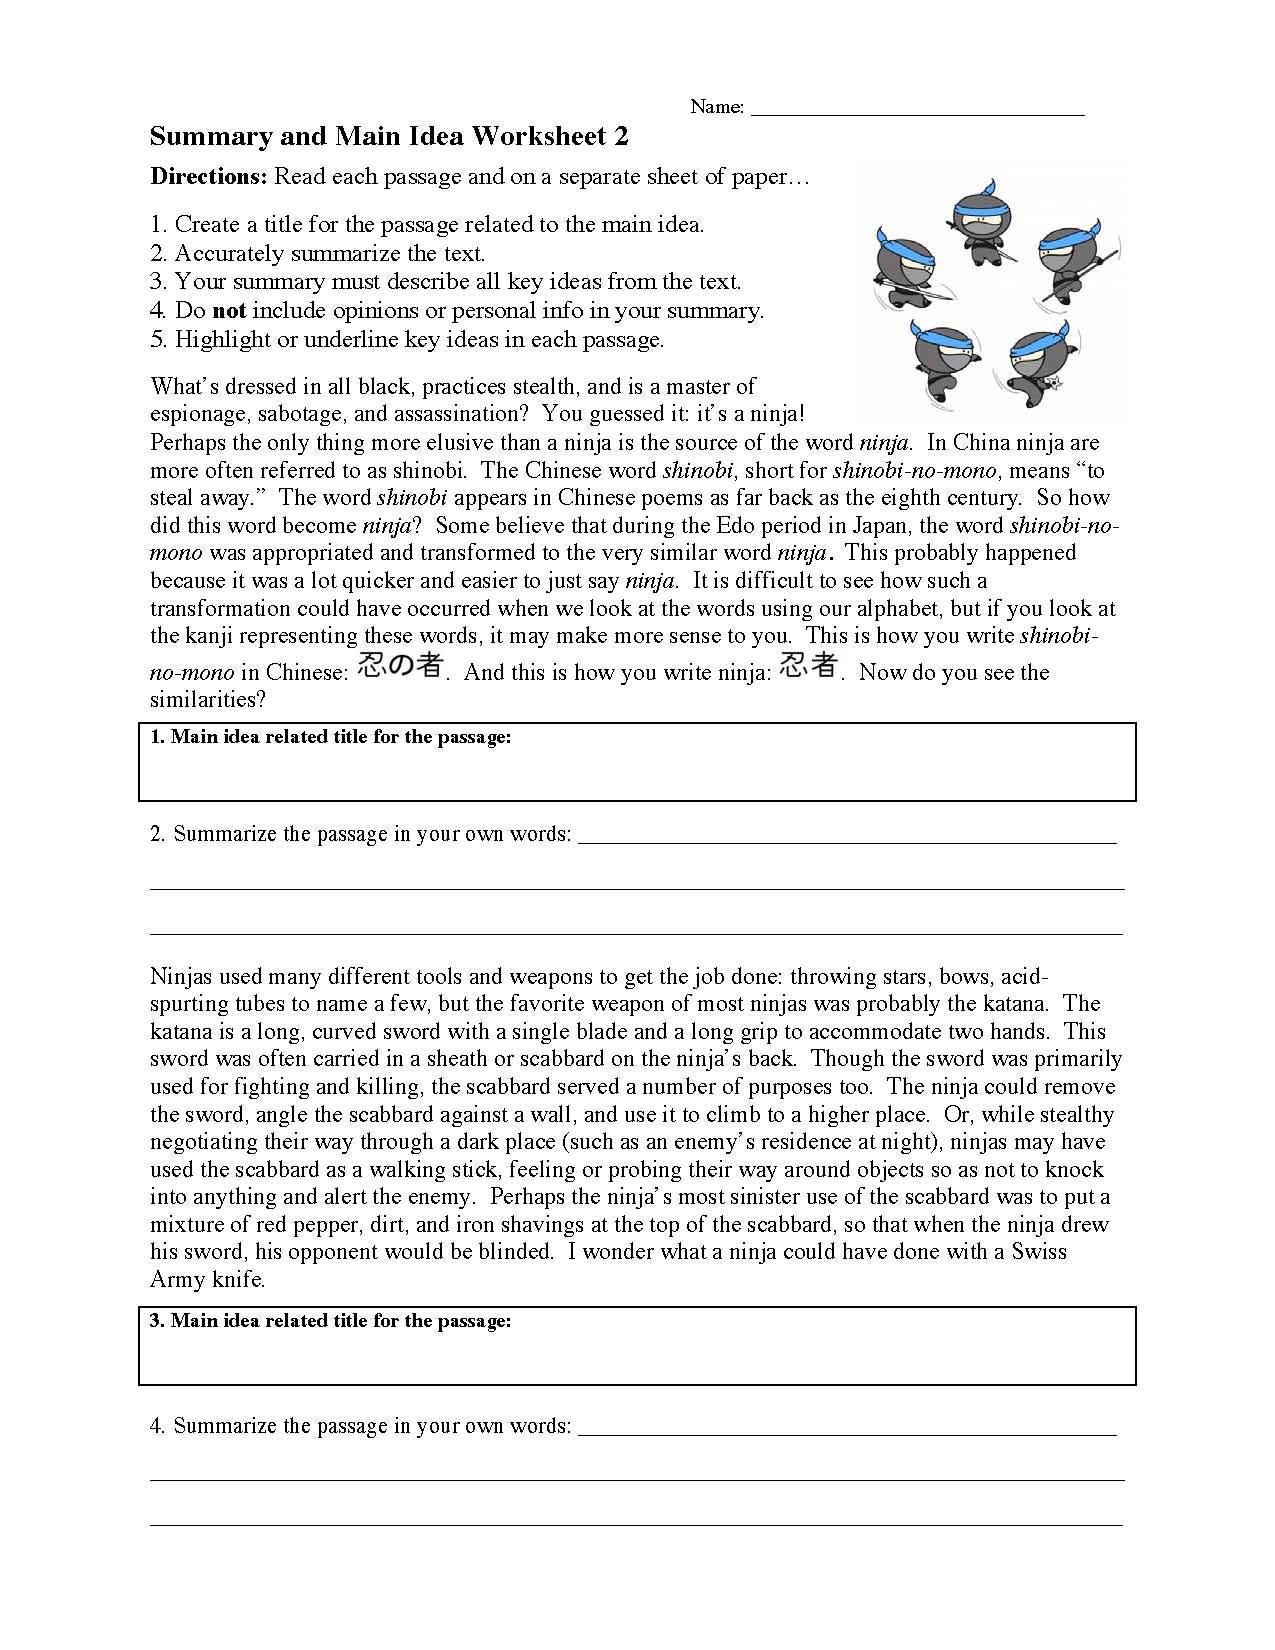 This is a preview image of Summarizing Worksheet 2. Click on it to enlarge it or view the source file.